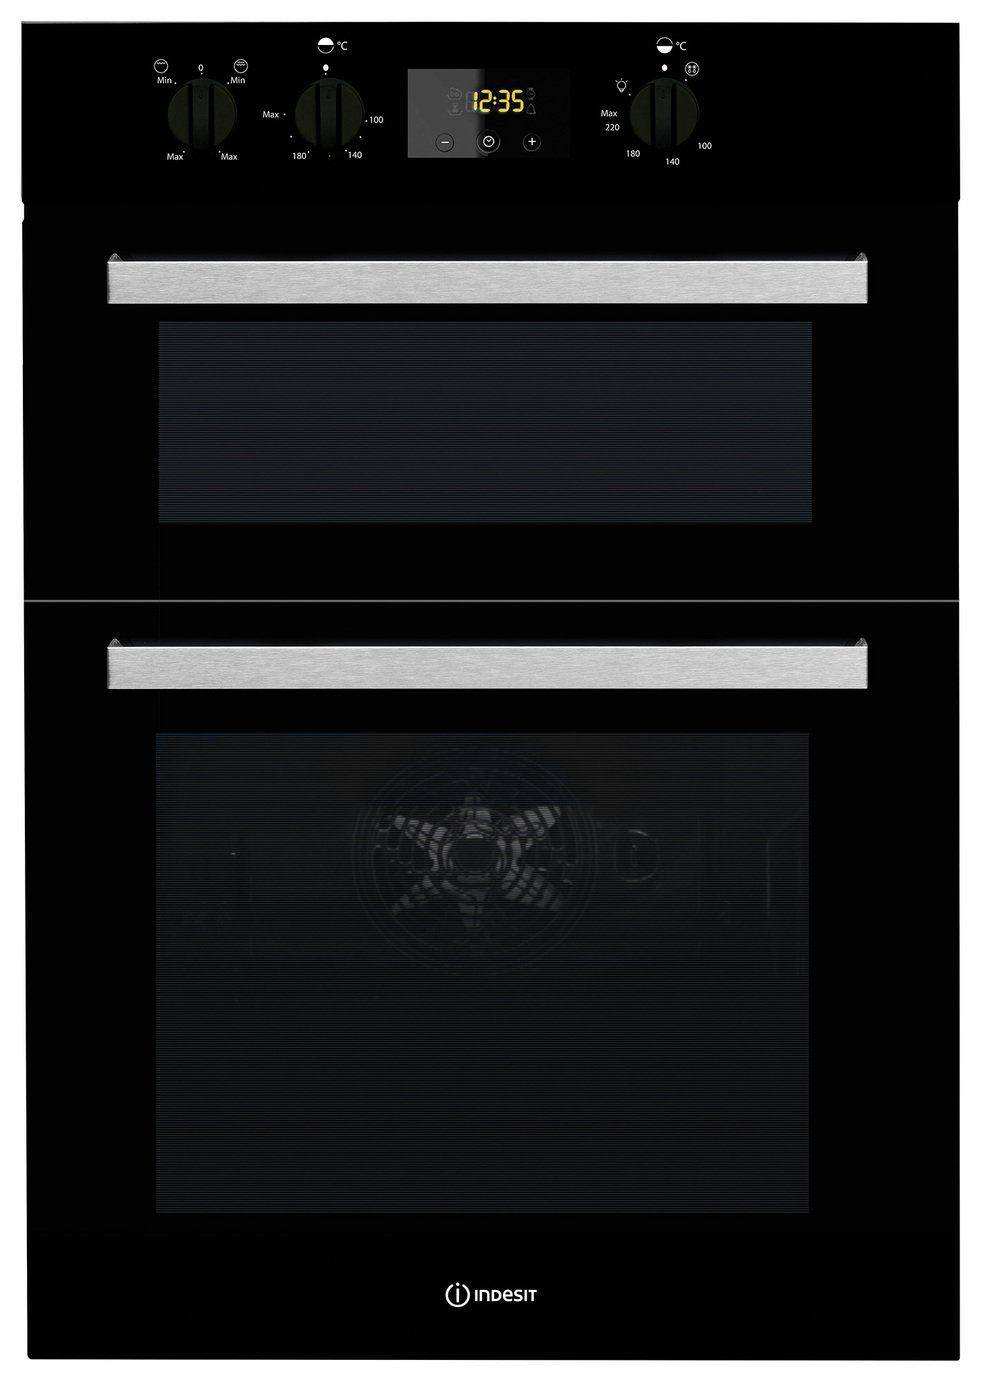 Indesit Aria IDD6340BL Built In Double Electric Oven - Black